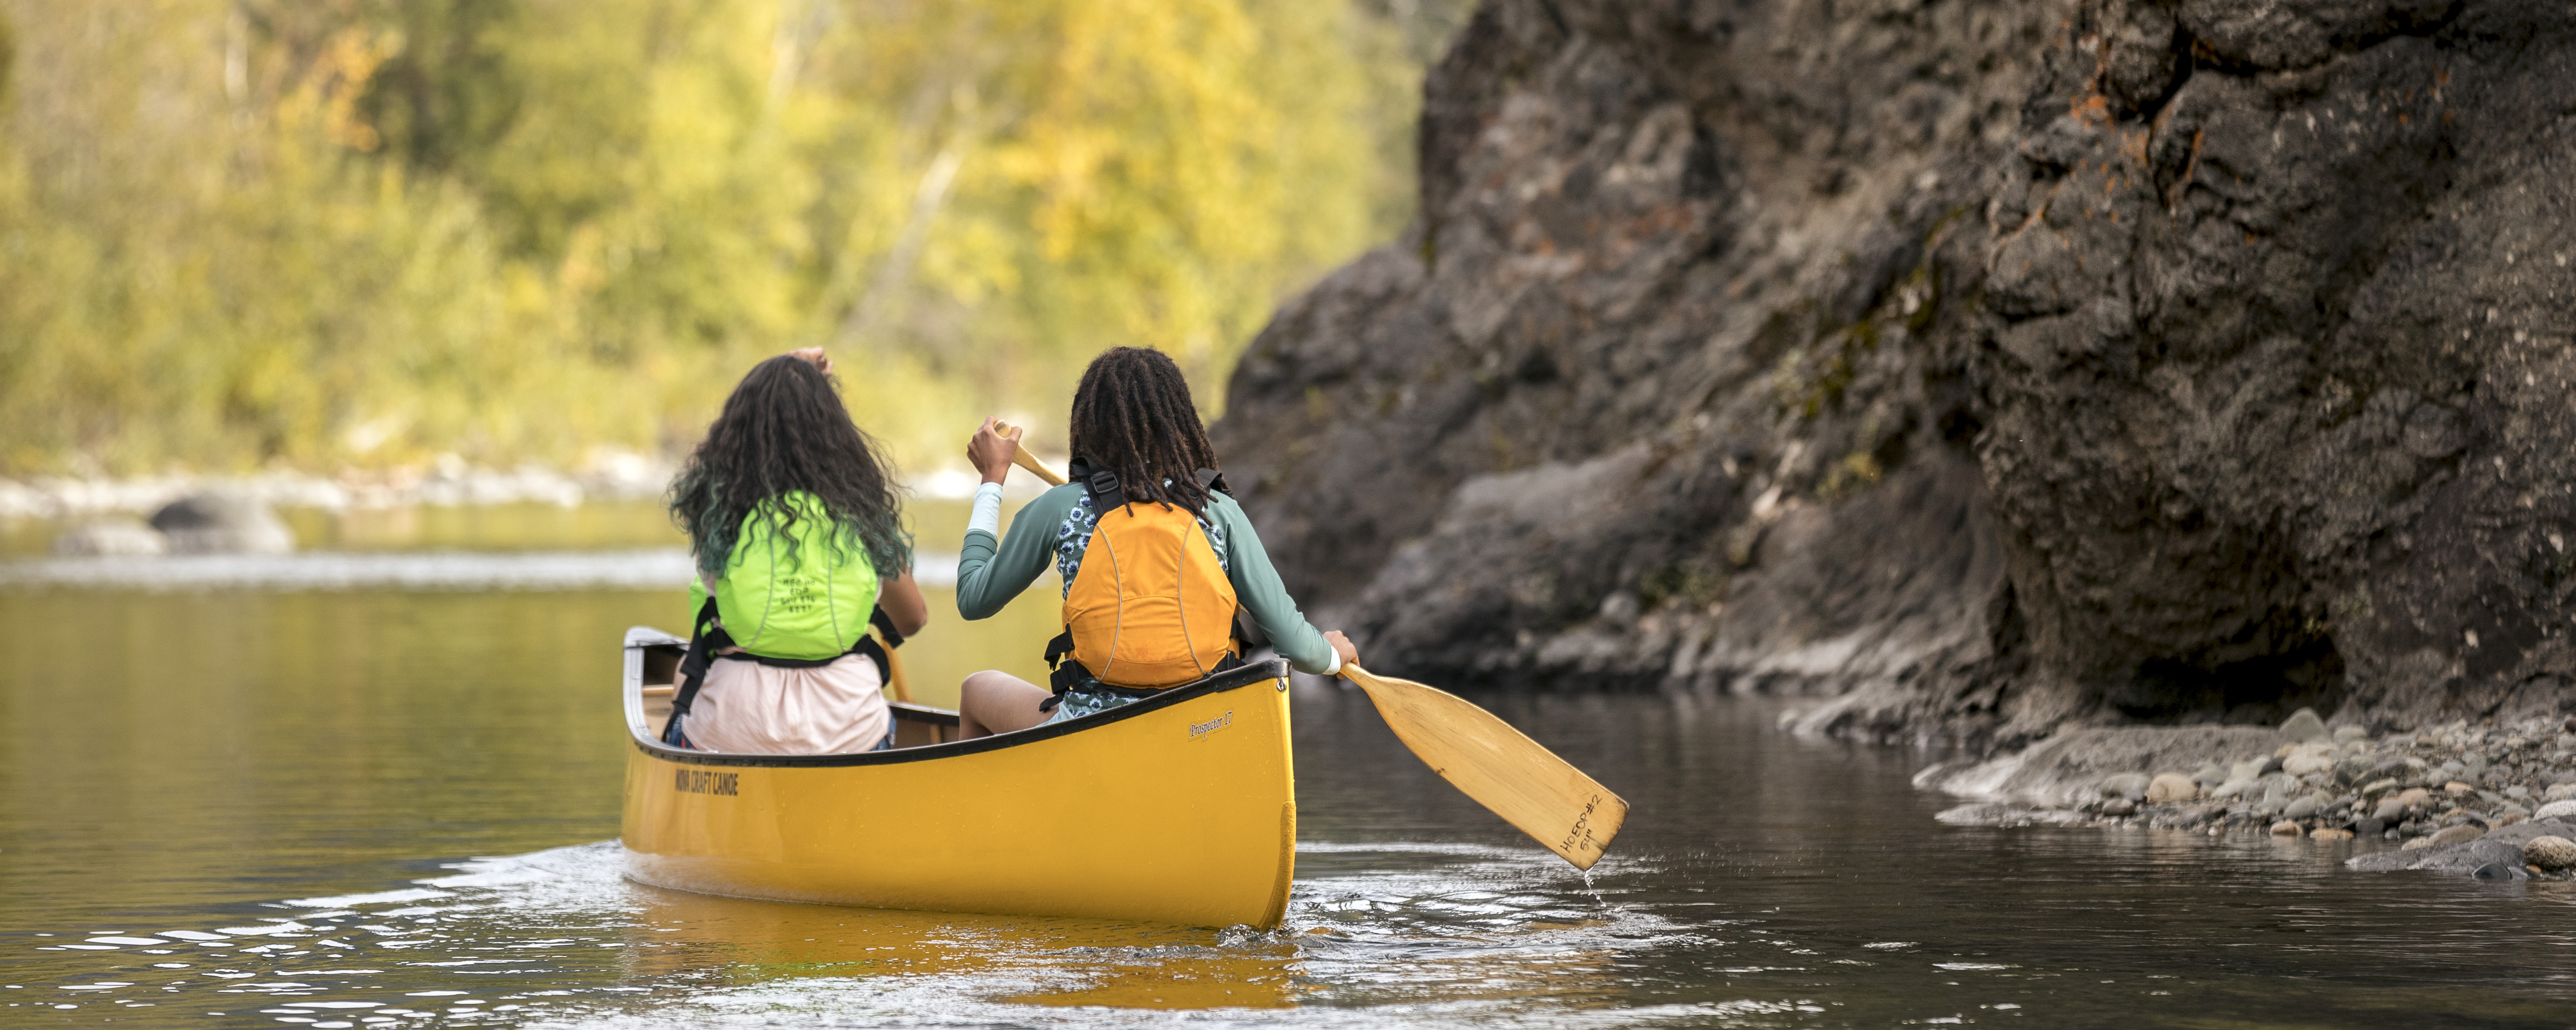 Canoeing in Minnesota The Complete Guide for the Best Canoeing Trip